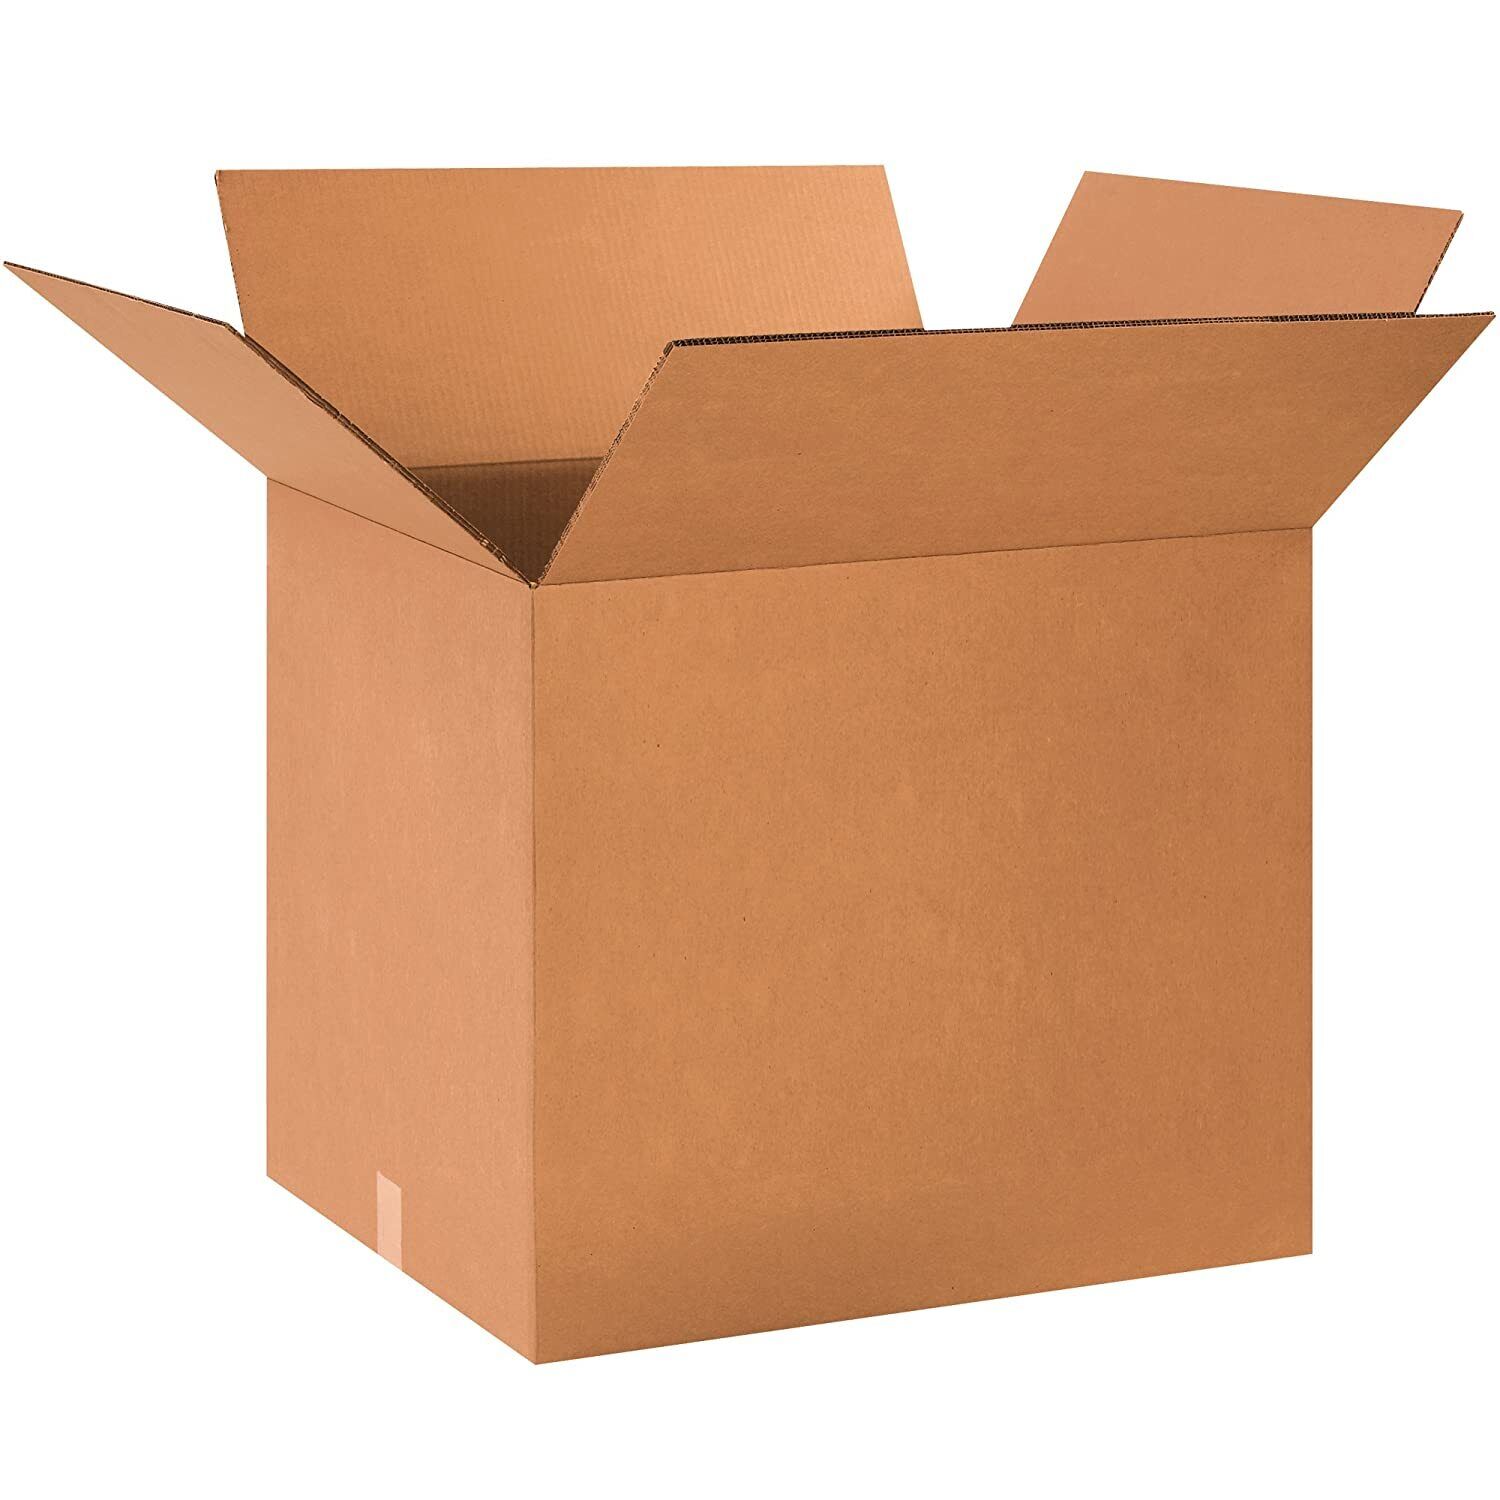 16X16X10 Corrugated Shipping Boxes Cardboard Boxes Shipping Box Moving Boxes 5CT